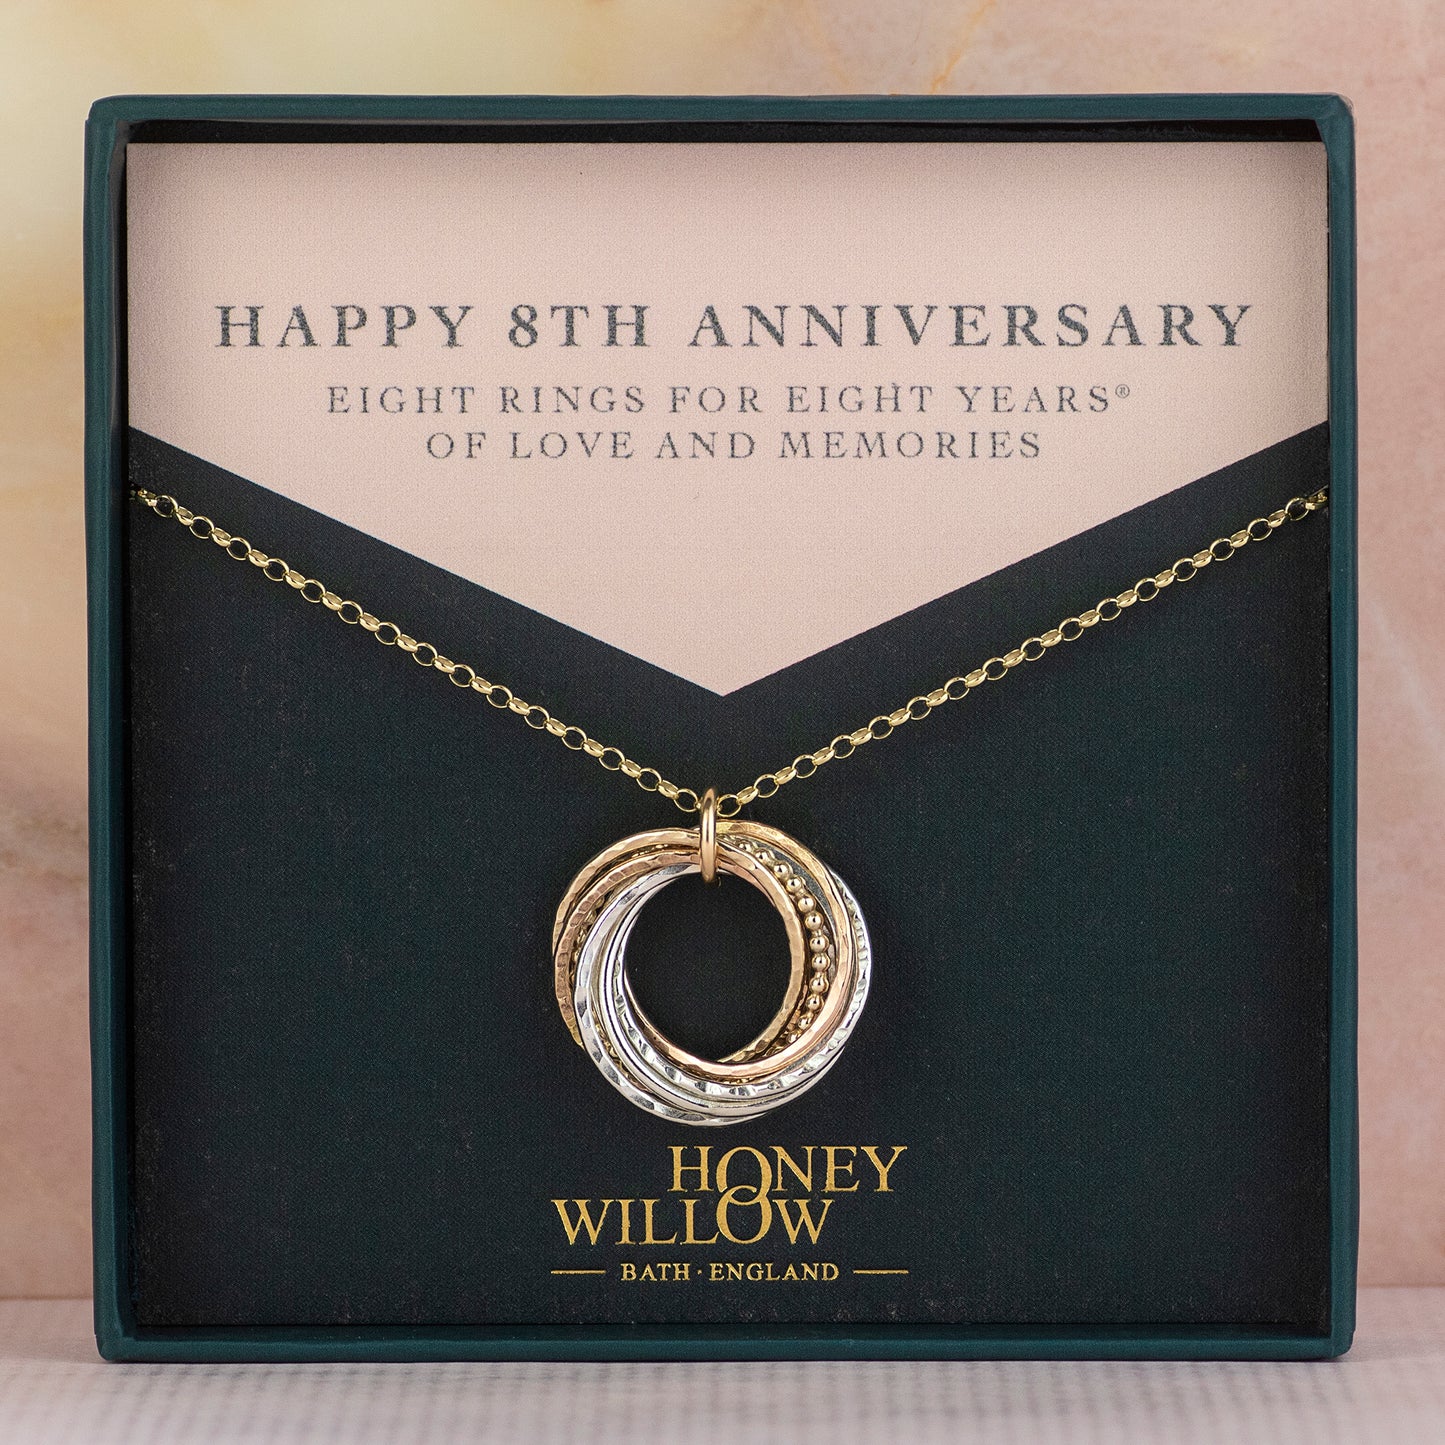 9kt Gold 8th Anniversary Necklace -  The Original 8 Links for 8 Years Necklace - Recycled Gold, Rose Gold & Silver